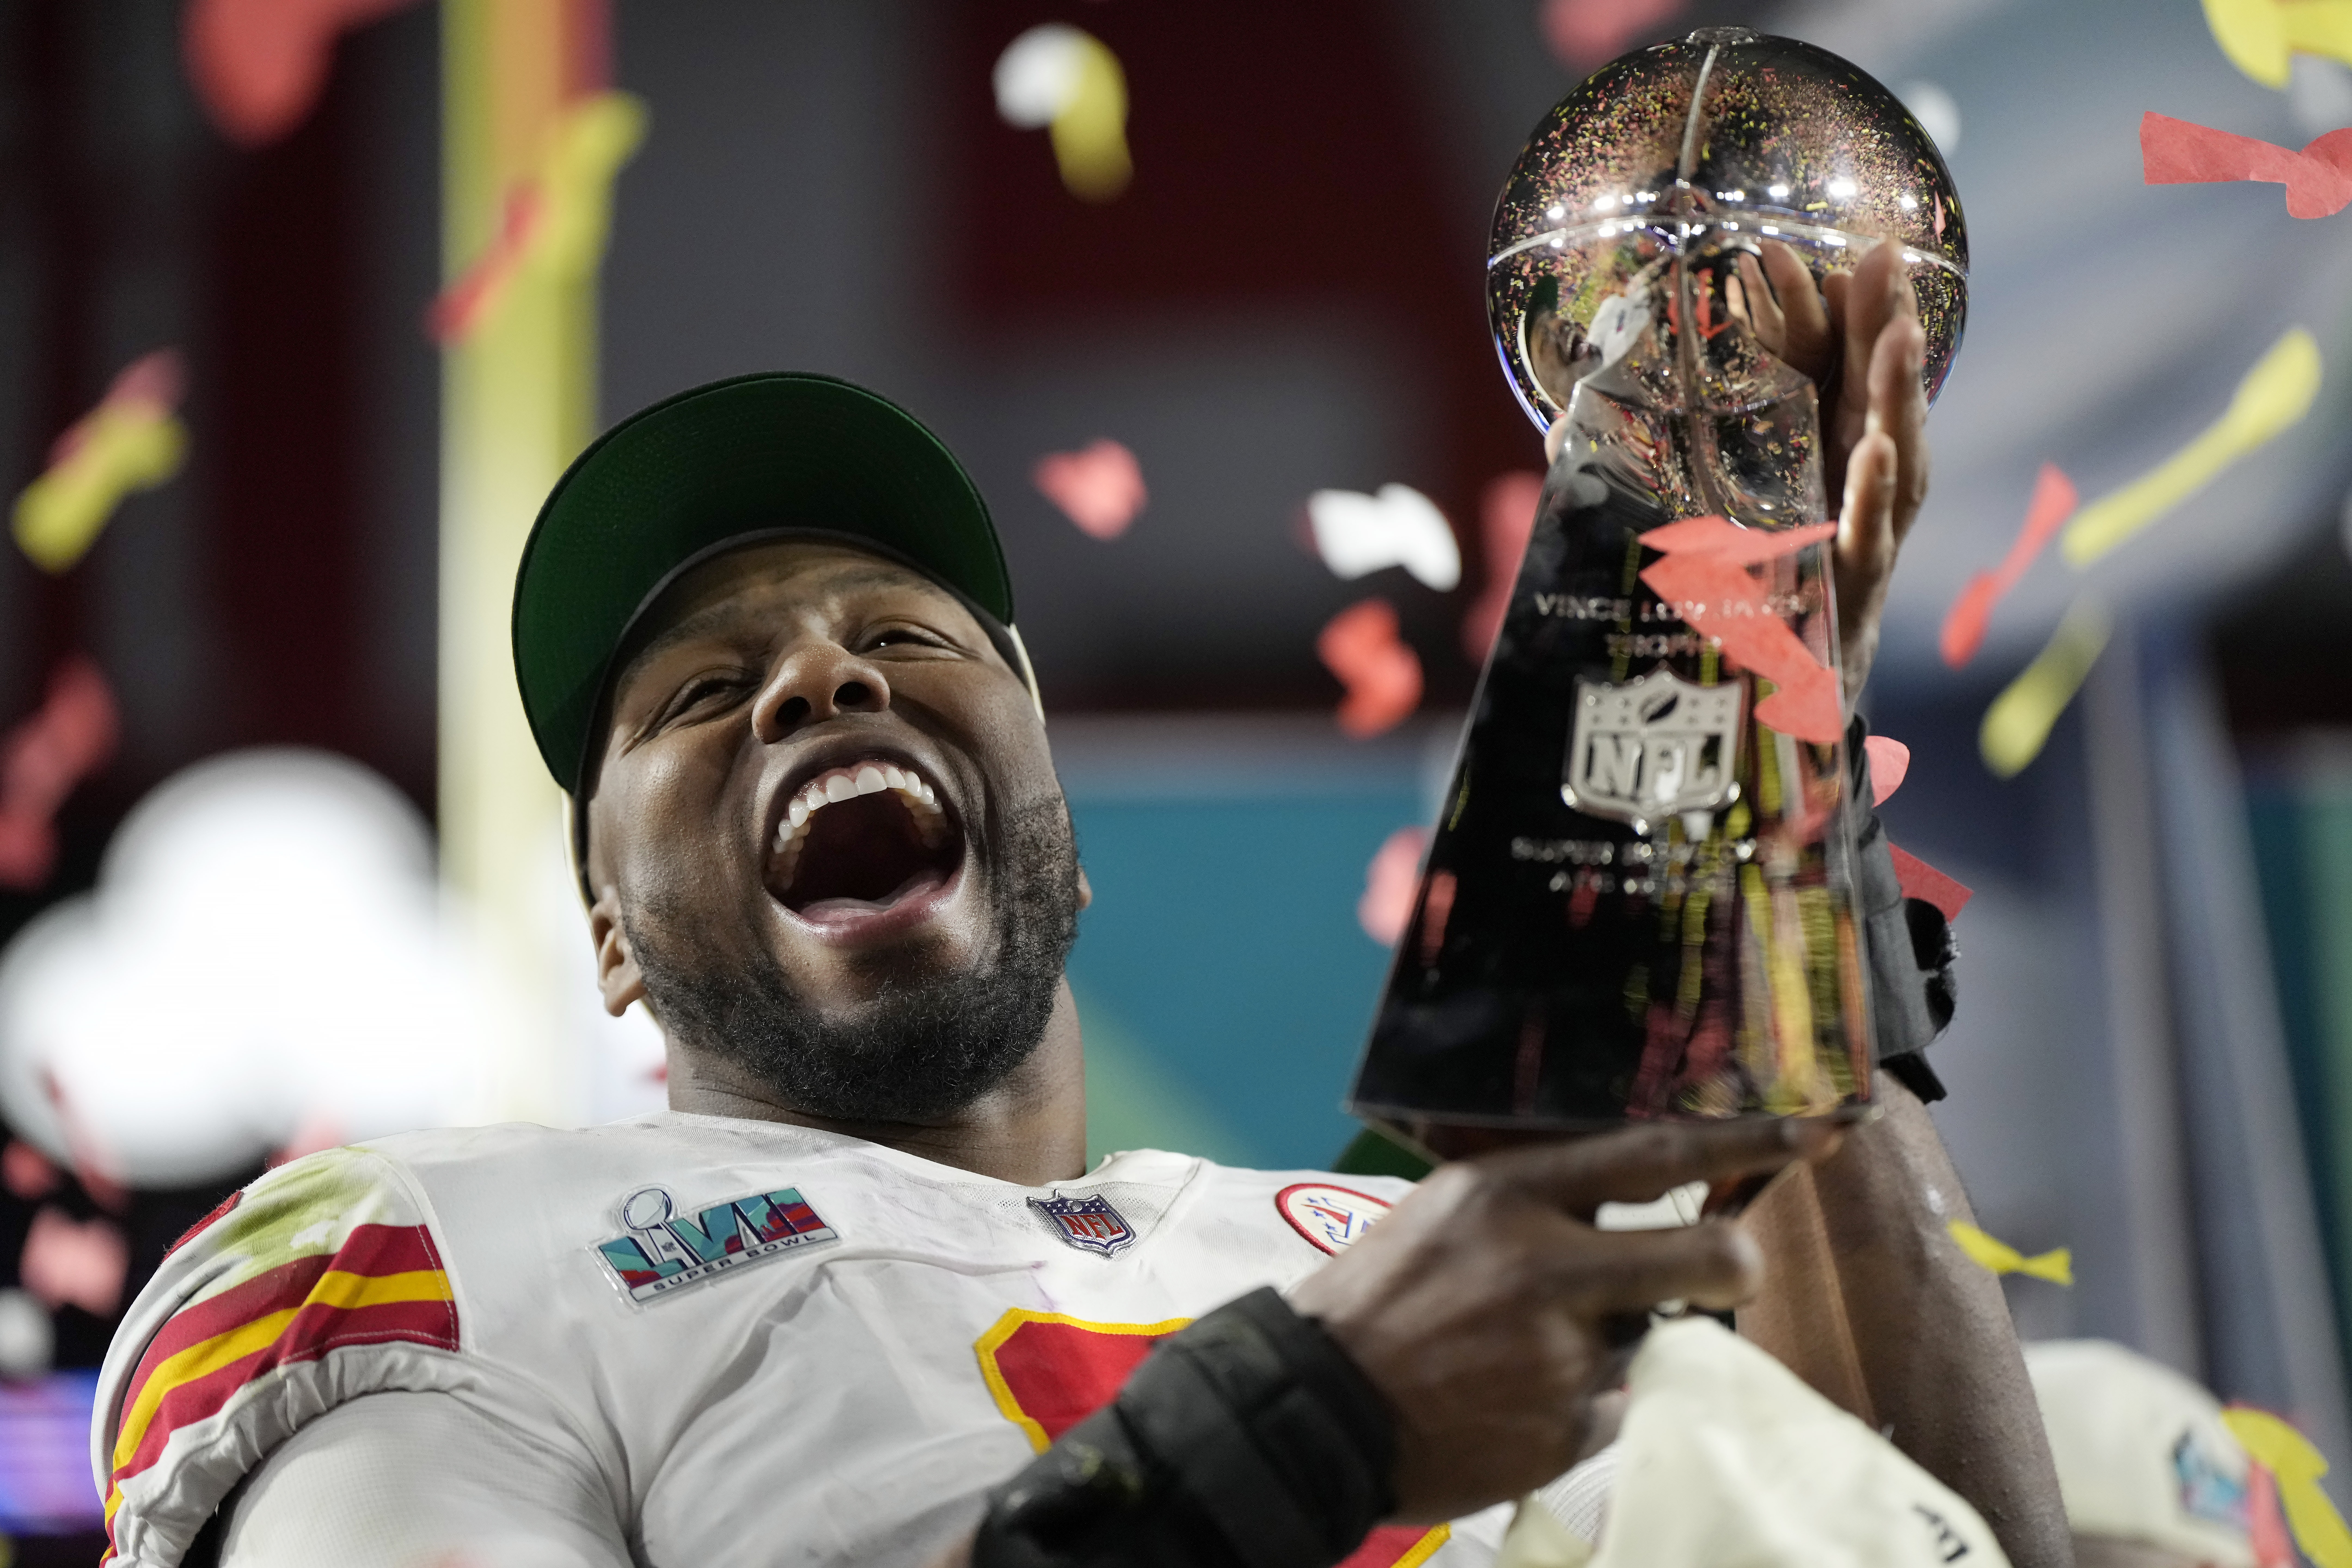 NFL on FOX - The NFC East has the most Super Bowls by division with 13.  It's also the only division where every team has at least 1 Lombardi  Trophy. Will the